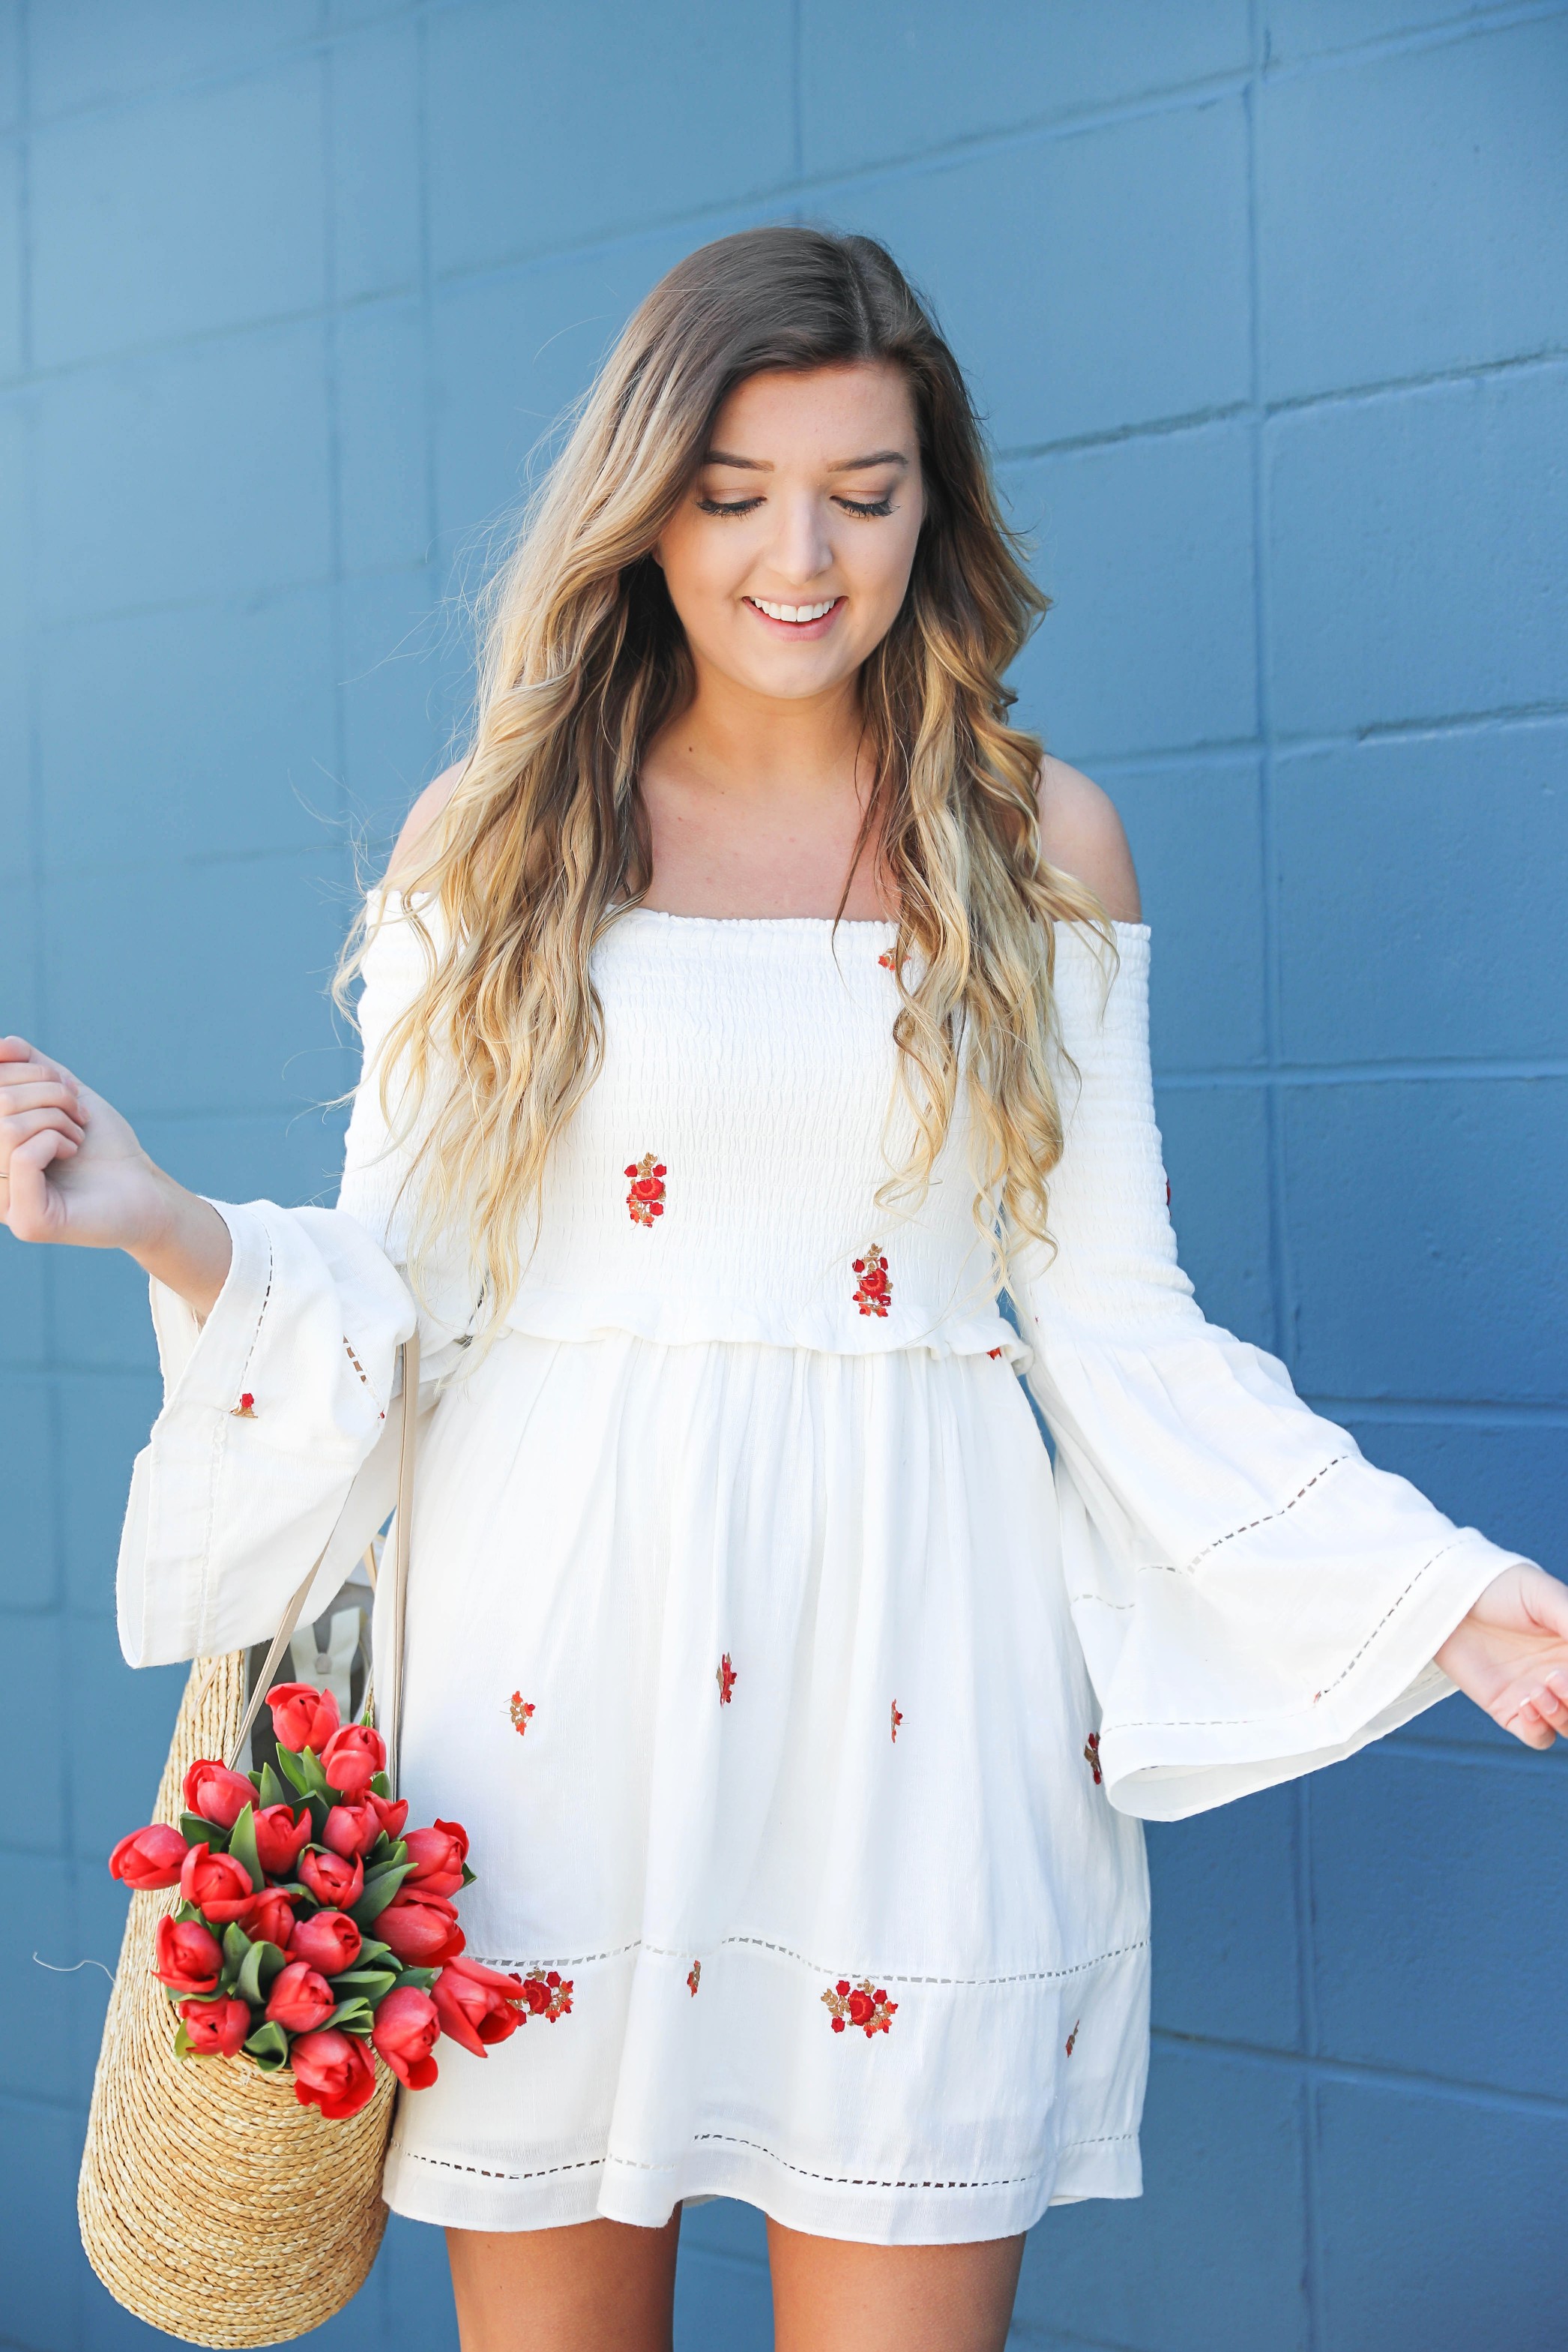 White off the shoulder dress with red embroidery by Free People! Love this look with red tulips in a straw bag and cute wedges! Perfect spring look on fashion blog daily dose of charm by lauren lindmark